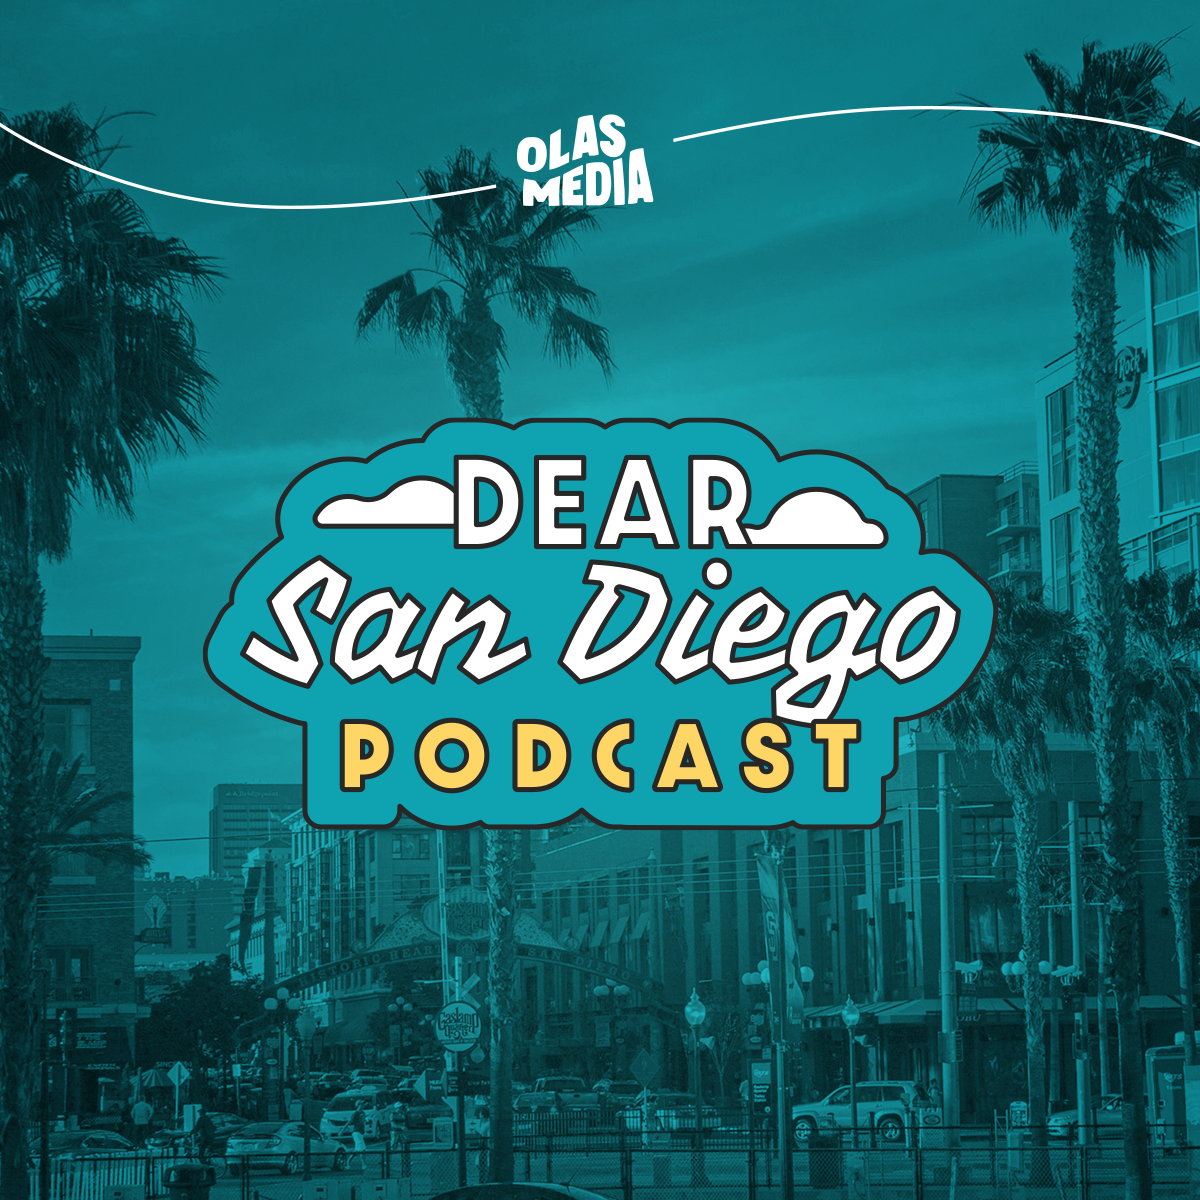 Steve Peace on San Diego Politics and Reforming his own California Voting Reform